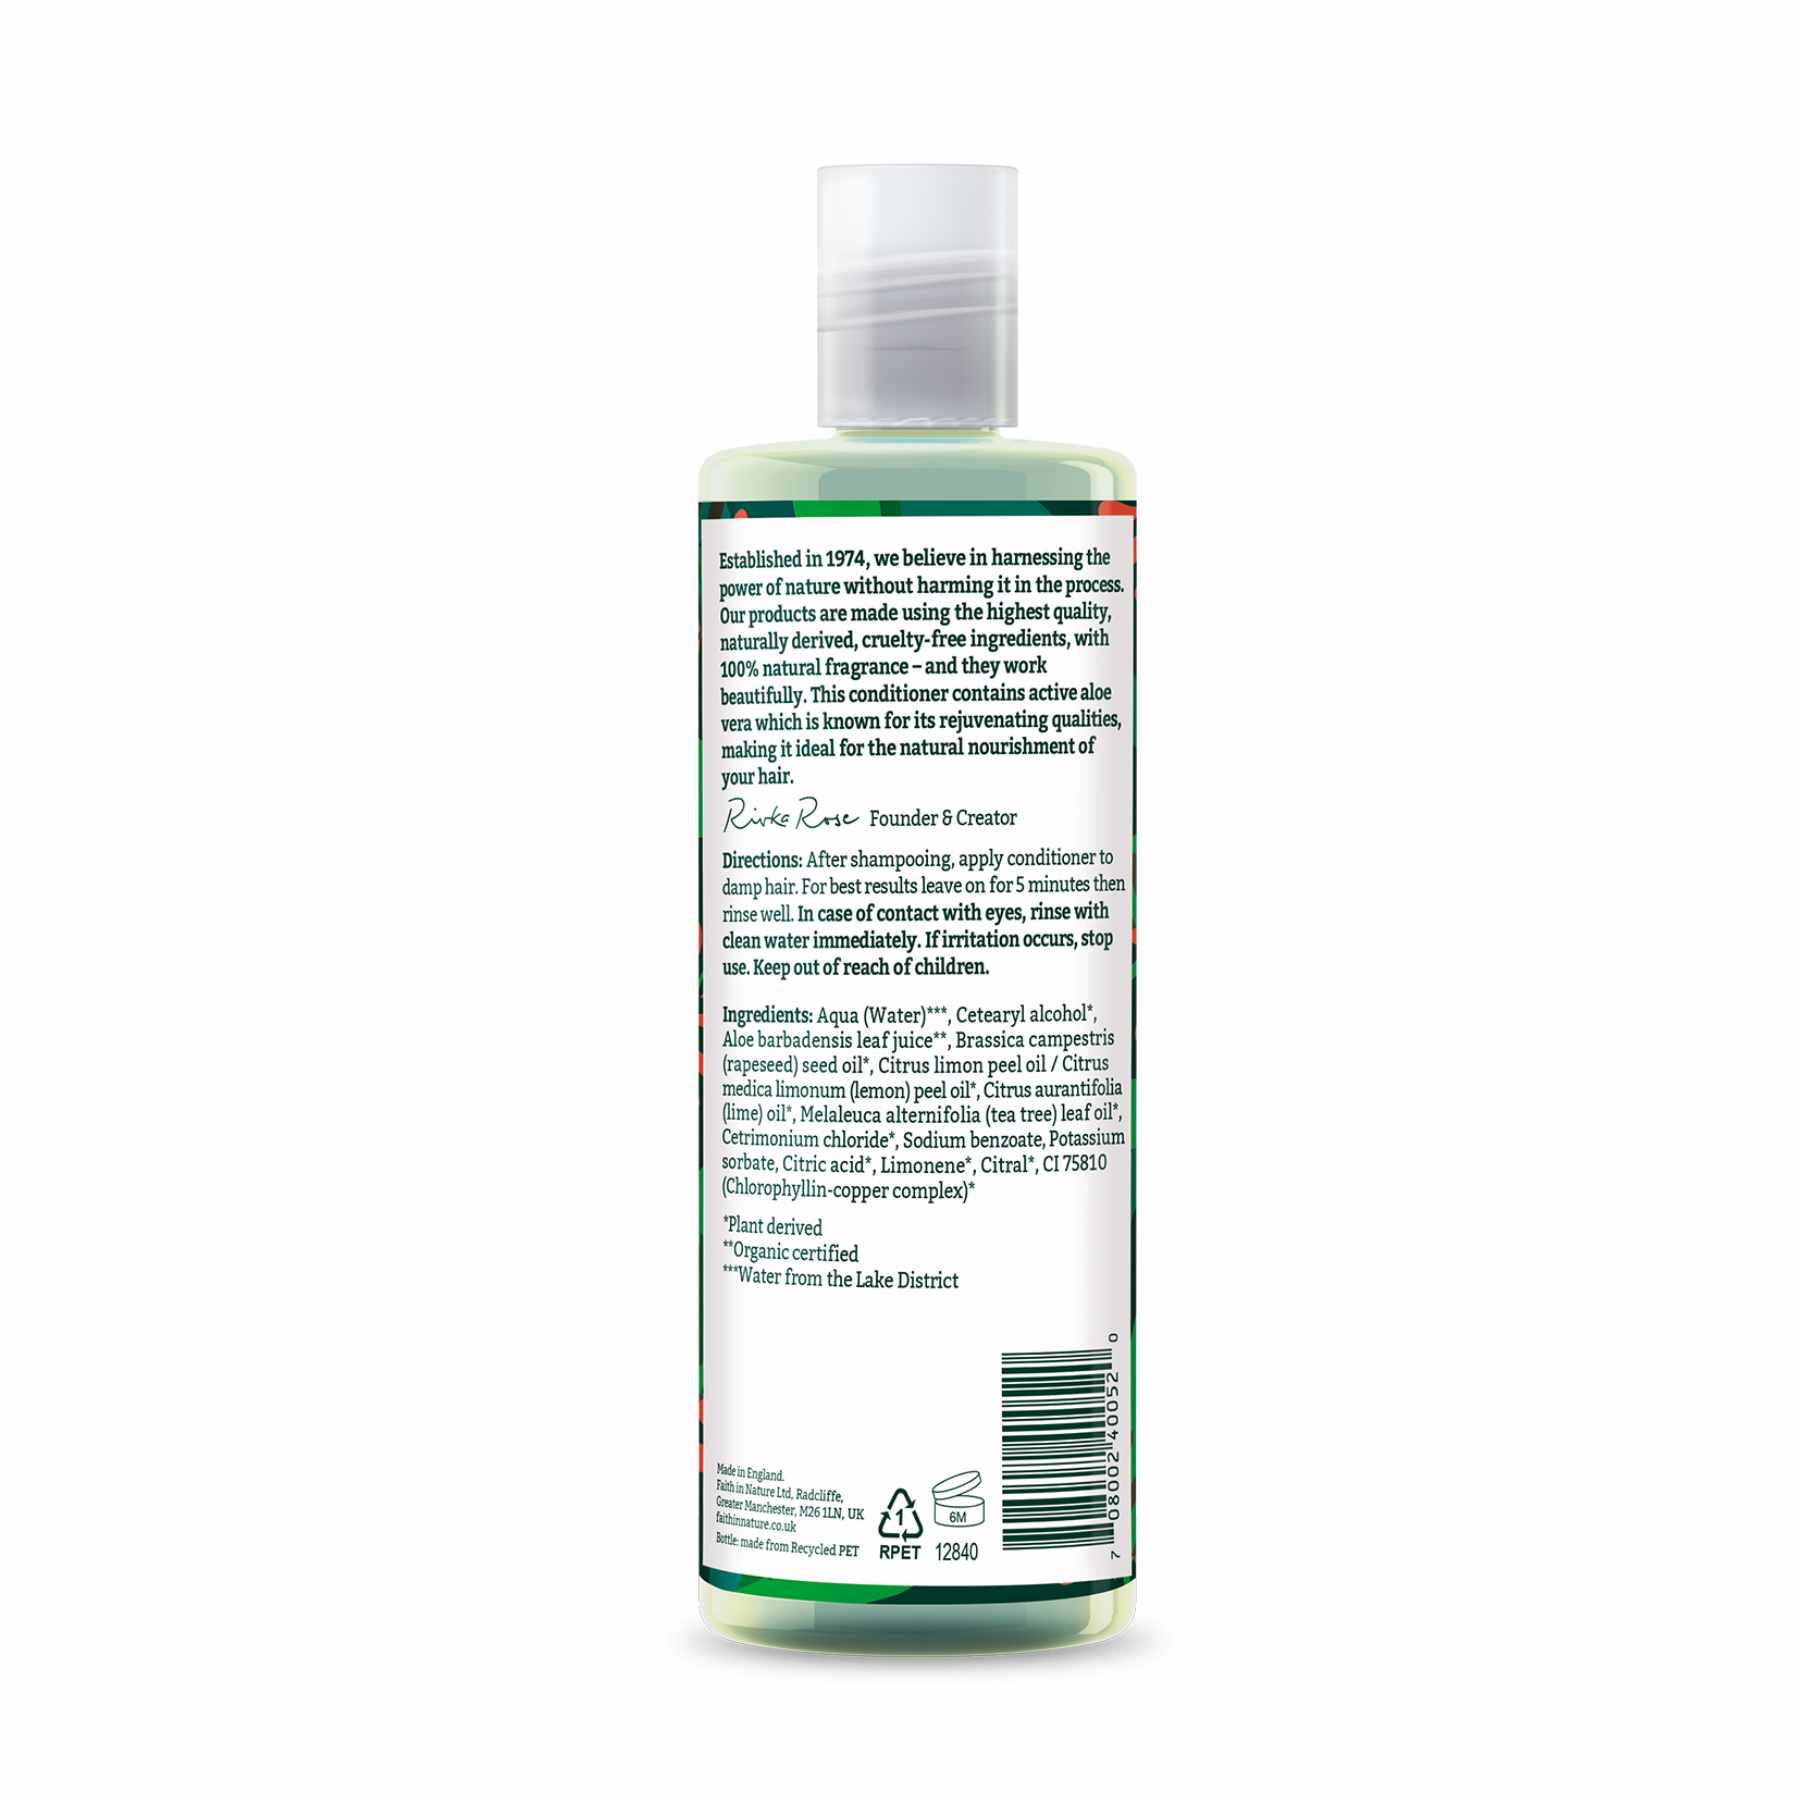 Shop Aloe Vera Conditioner from Faith in Nature on SublimeLife.in. Best for providing natural nourishment to your hair.